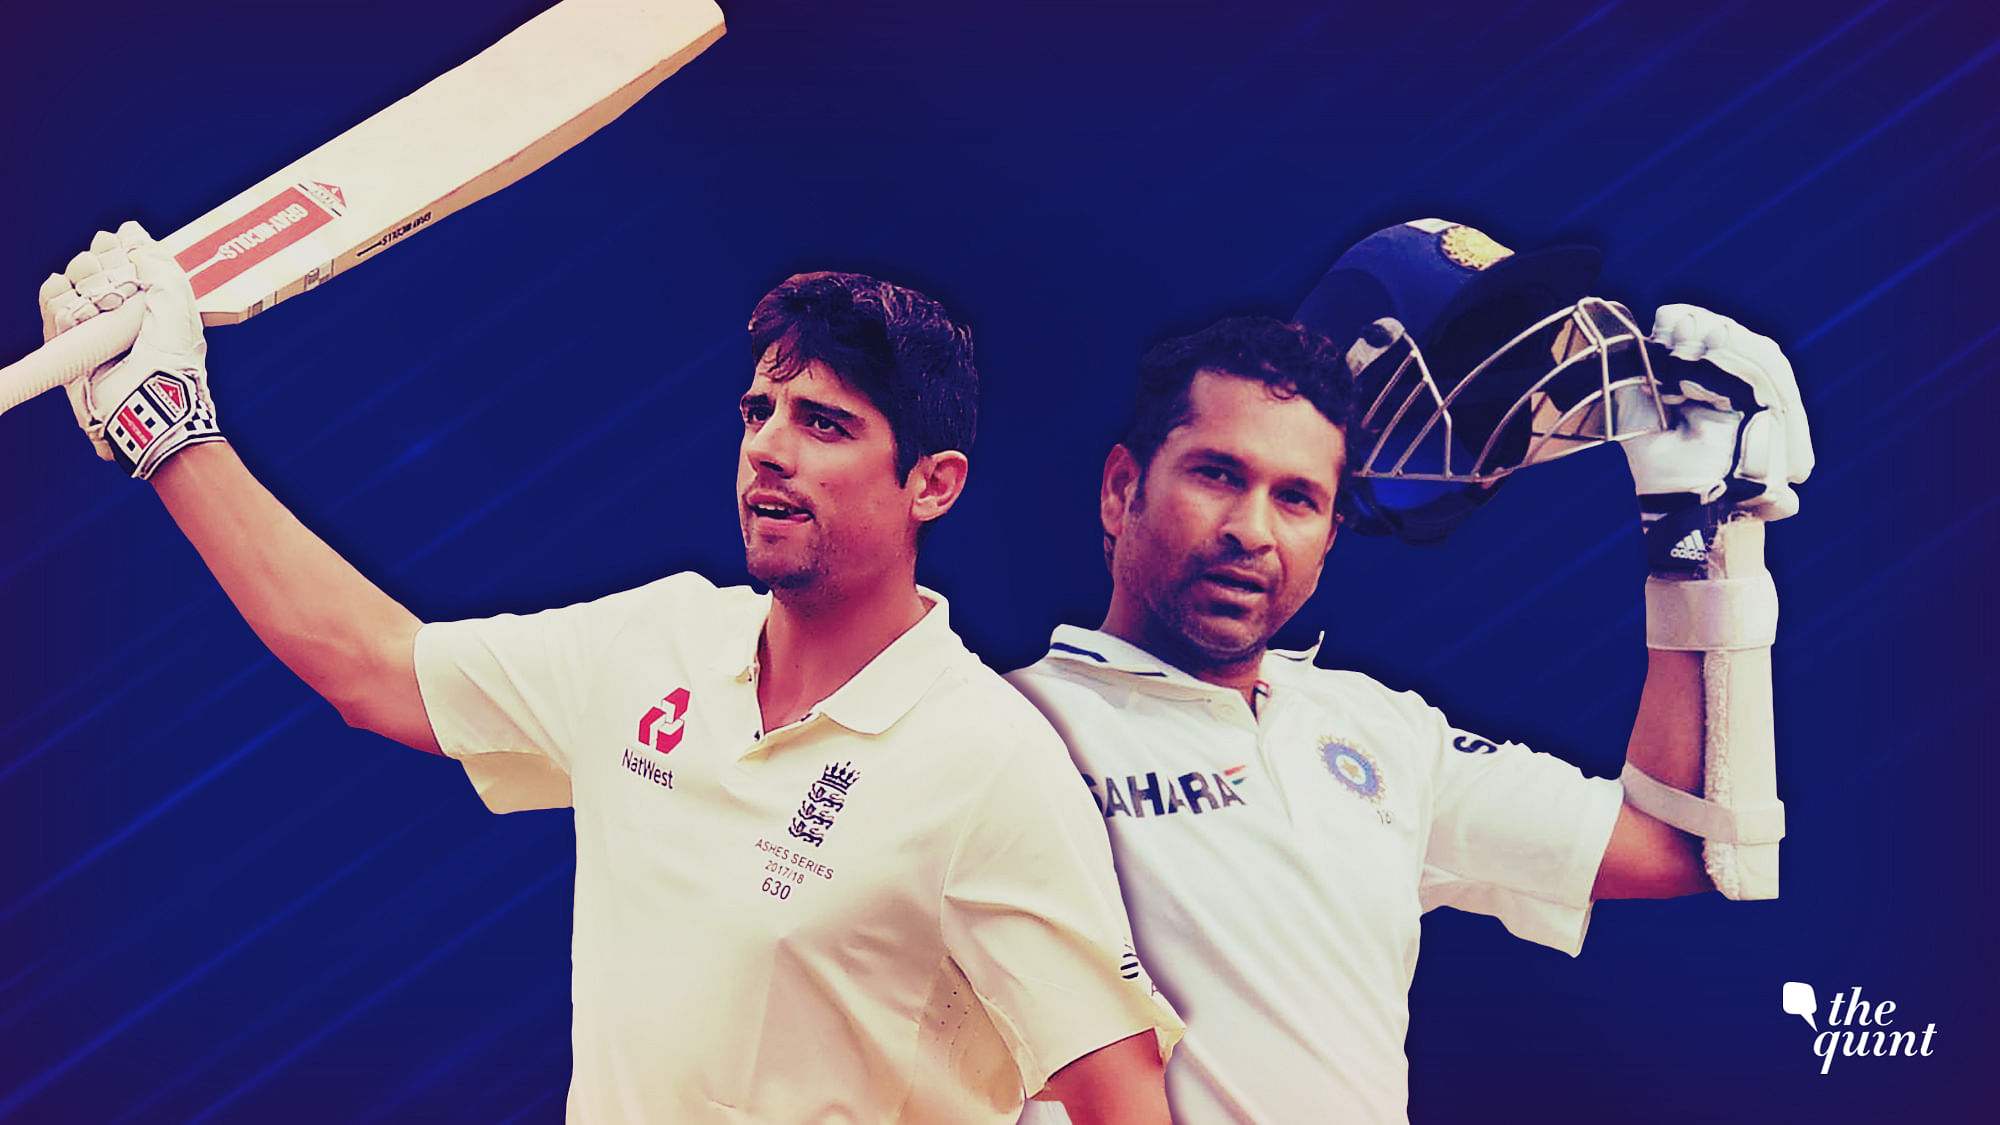 Alastair Cook has 12,254 Test runs against his name, which is 3,667 short of Tendulkar’s tally of 15,921.